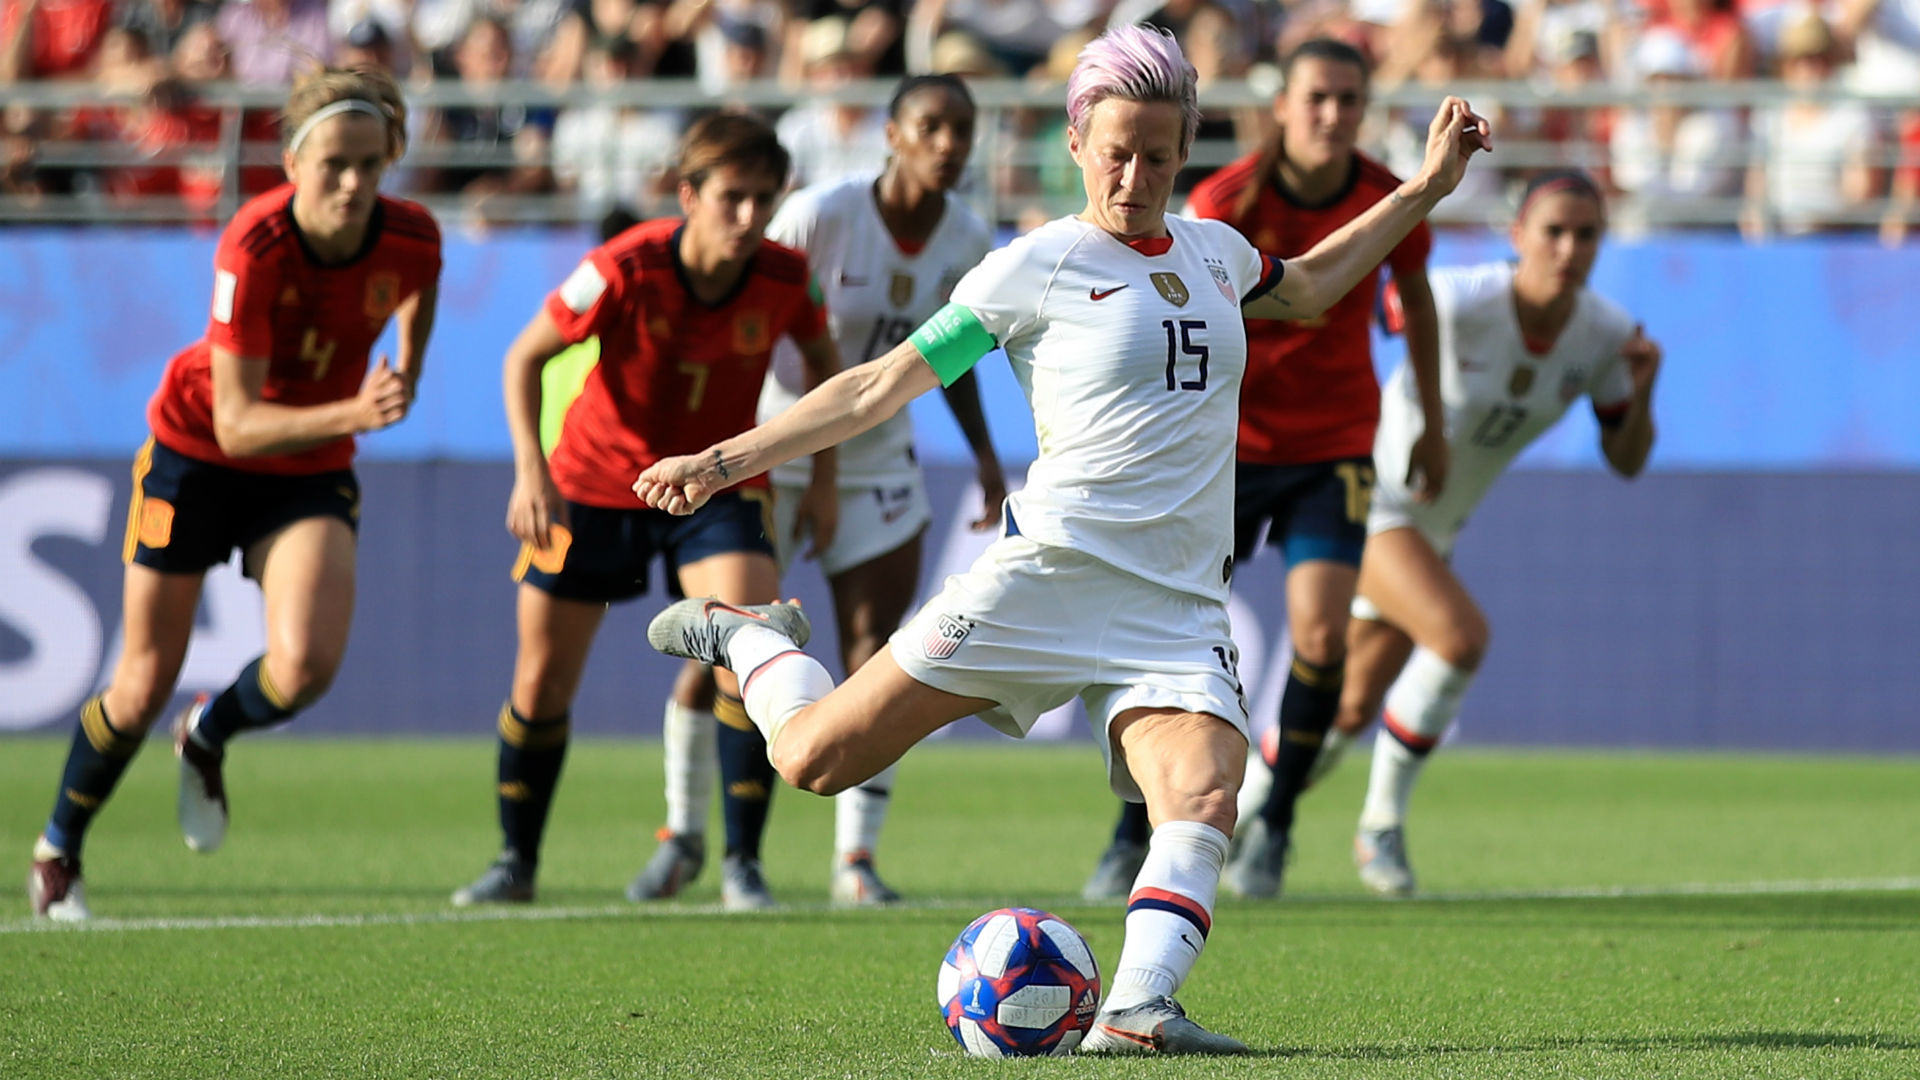 Uswnt Vs Spain Results Megan Rapinoe Penalty Brace Helps Usa Survive First Challenge At World Cup Sporting News